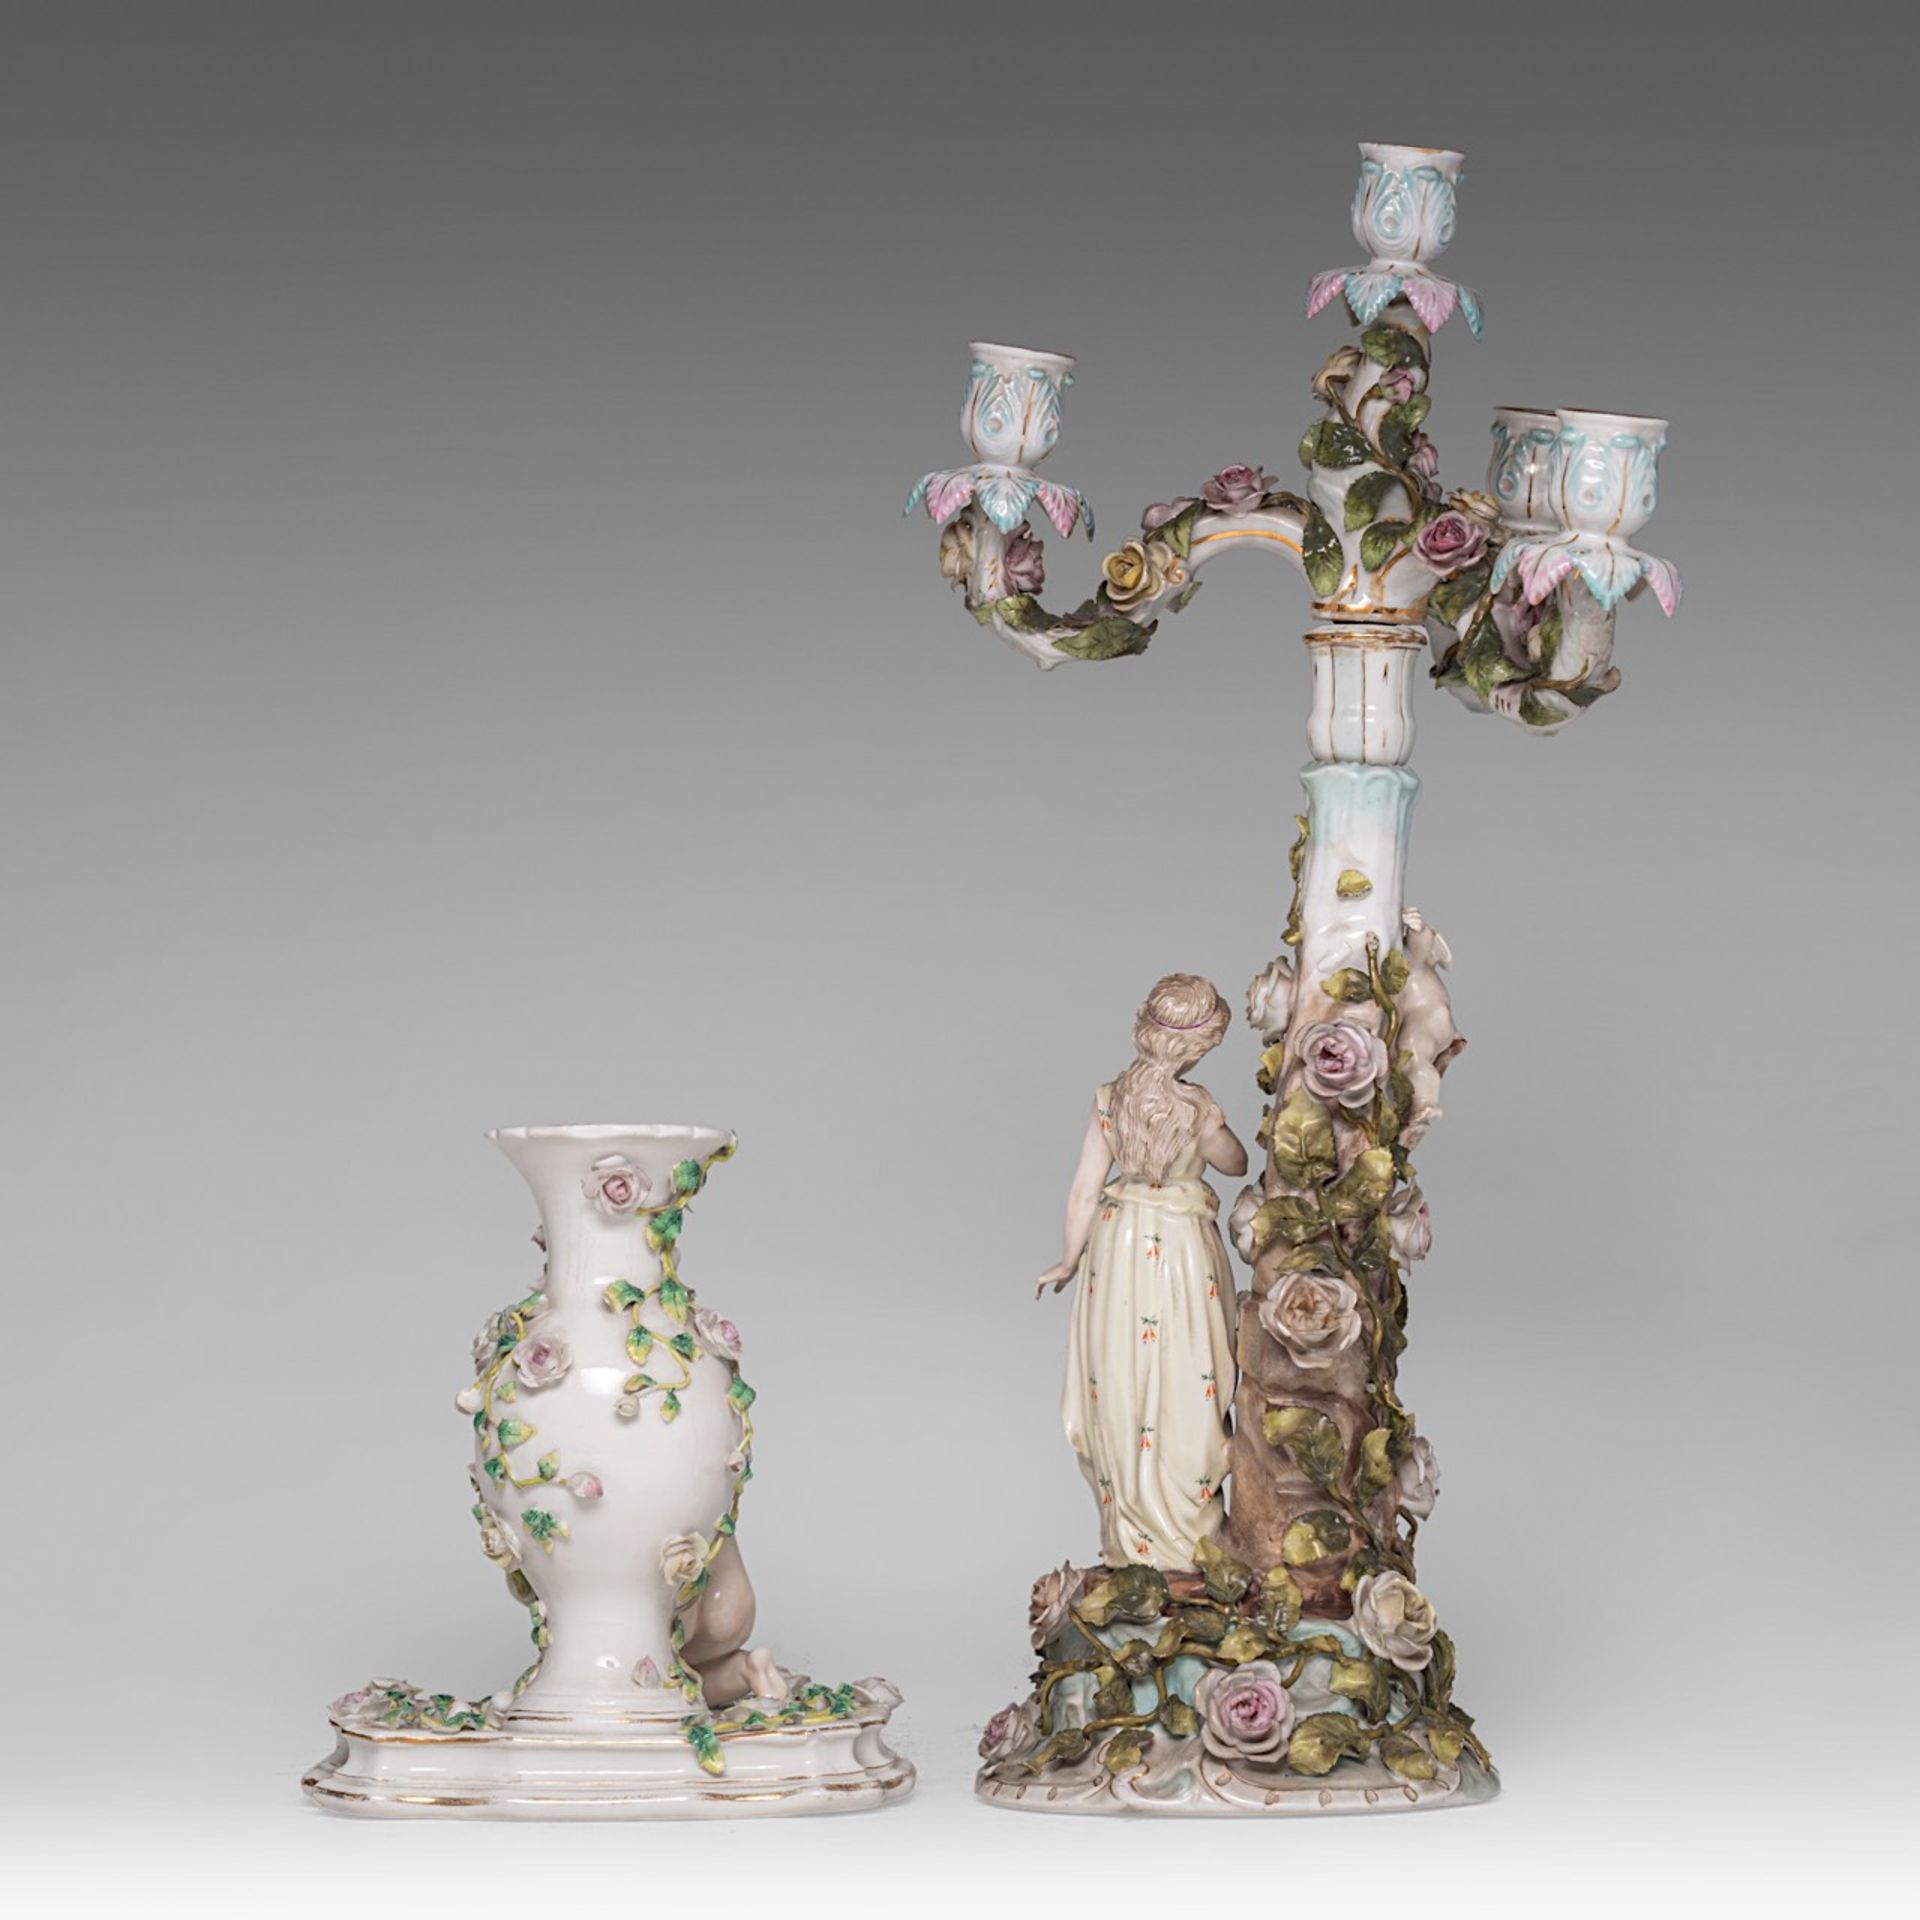 A collection of polychrome decorated Saxon porcelain figurines and a candelabra, H 51,5 cm (tallest) - Bild 4 aus 13